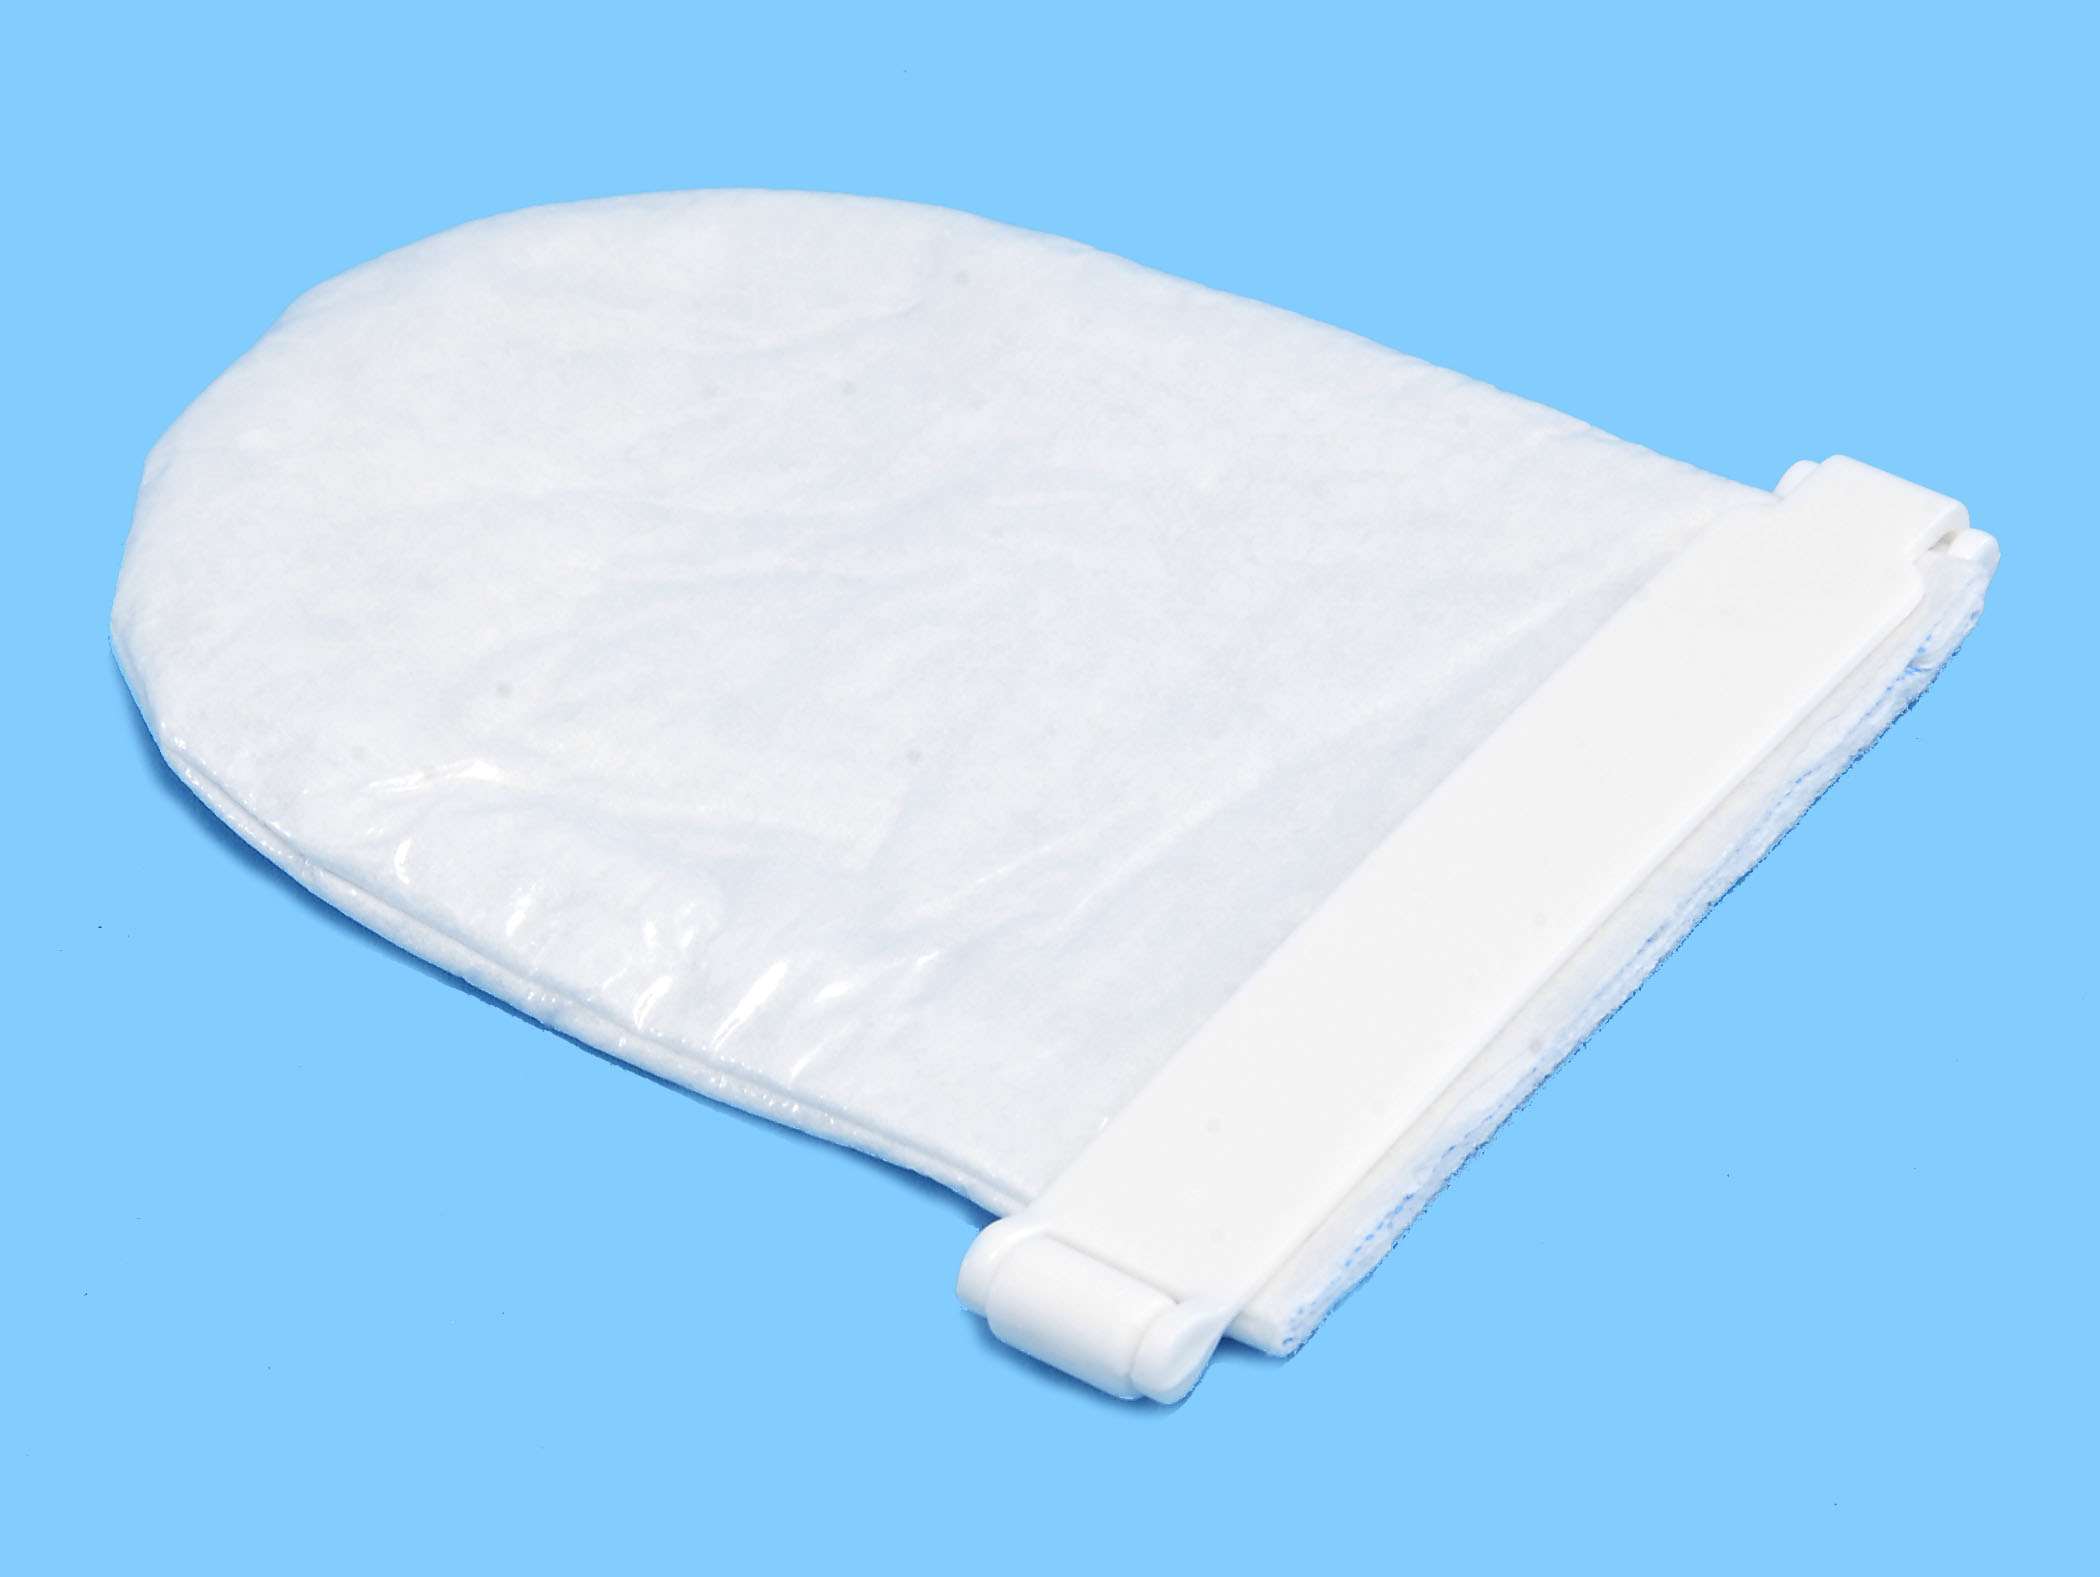 Clamp with absorbent pouch